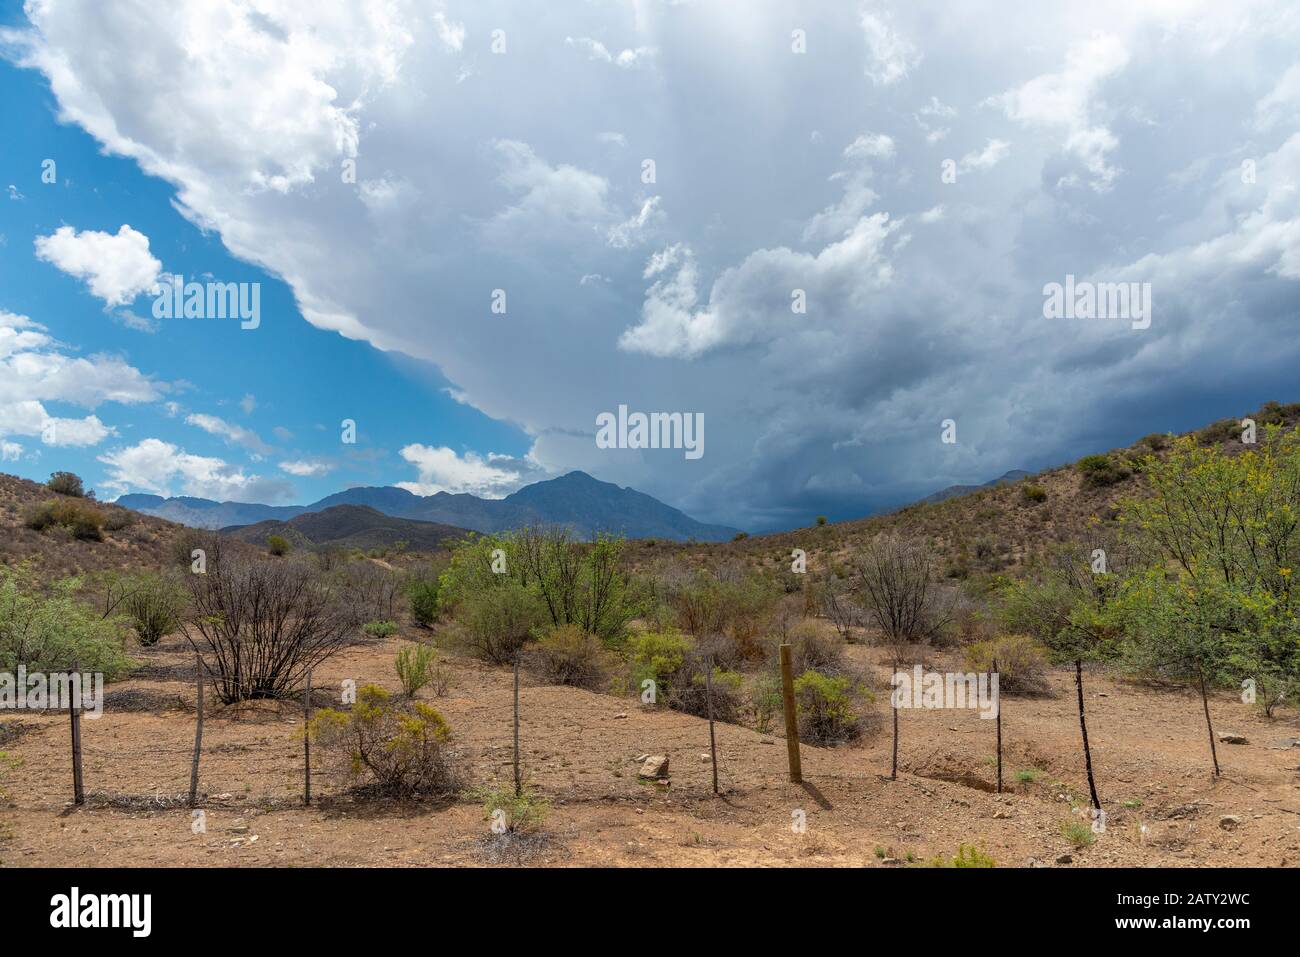 The Karoo barren landscape with spectacular cloud formations forming over the mountains, South Africa Stock Photo